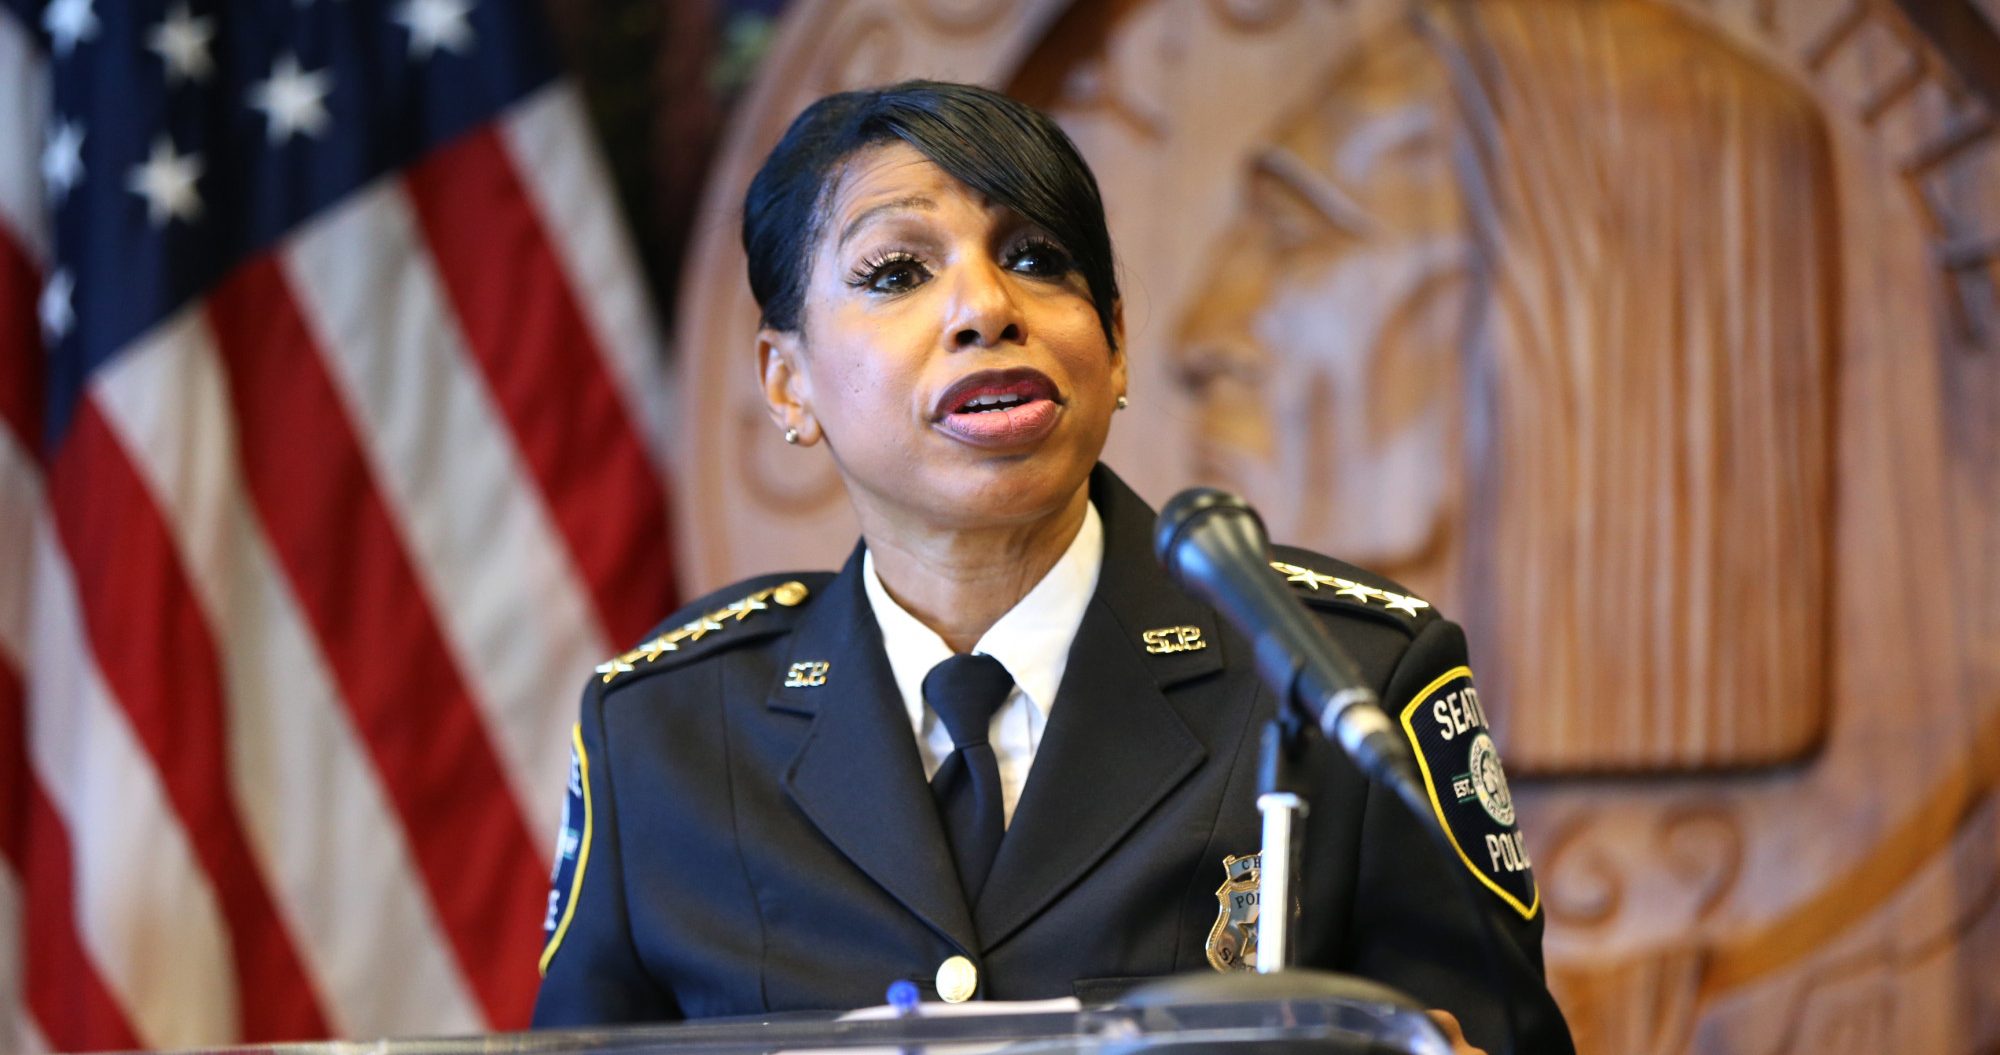 Seattle Police Department Chief Resigns Over ‘Impasse’ With City